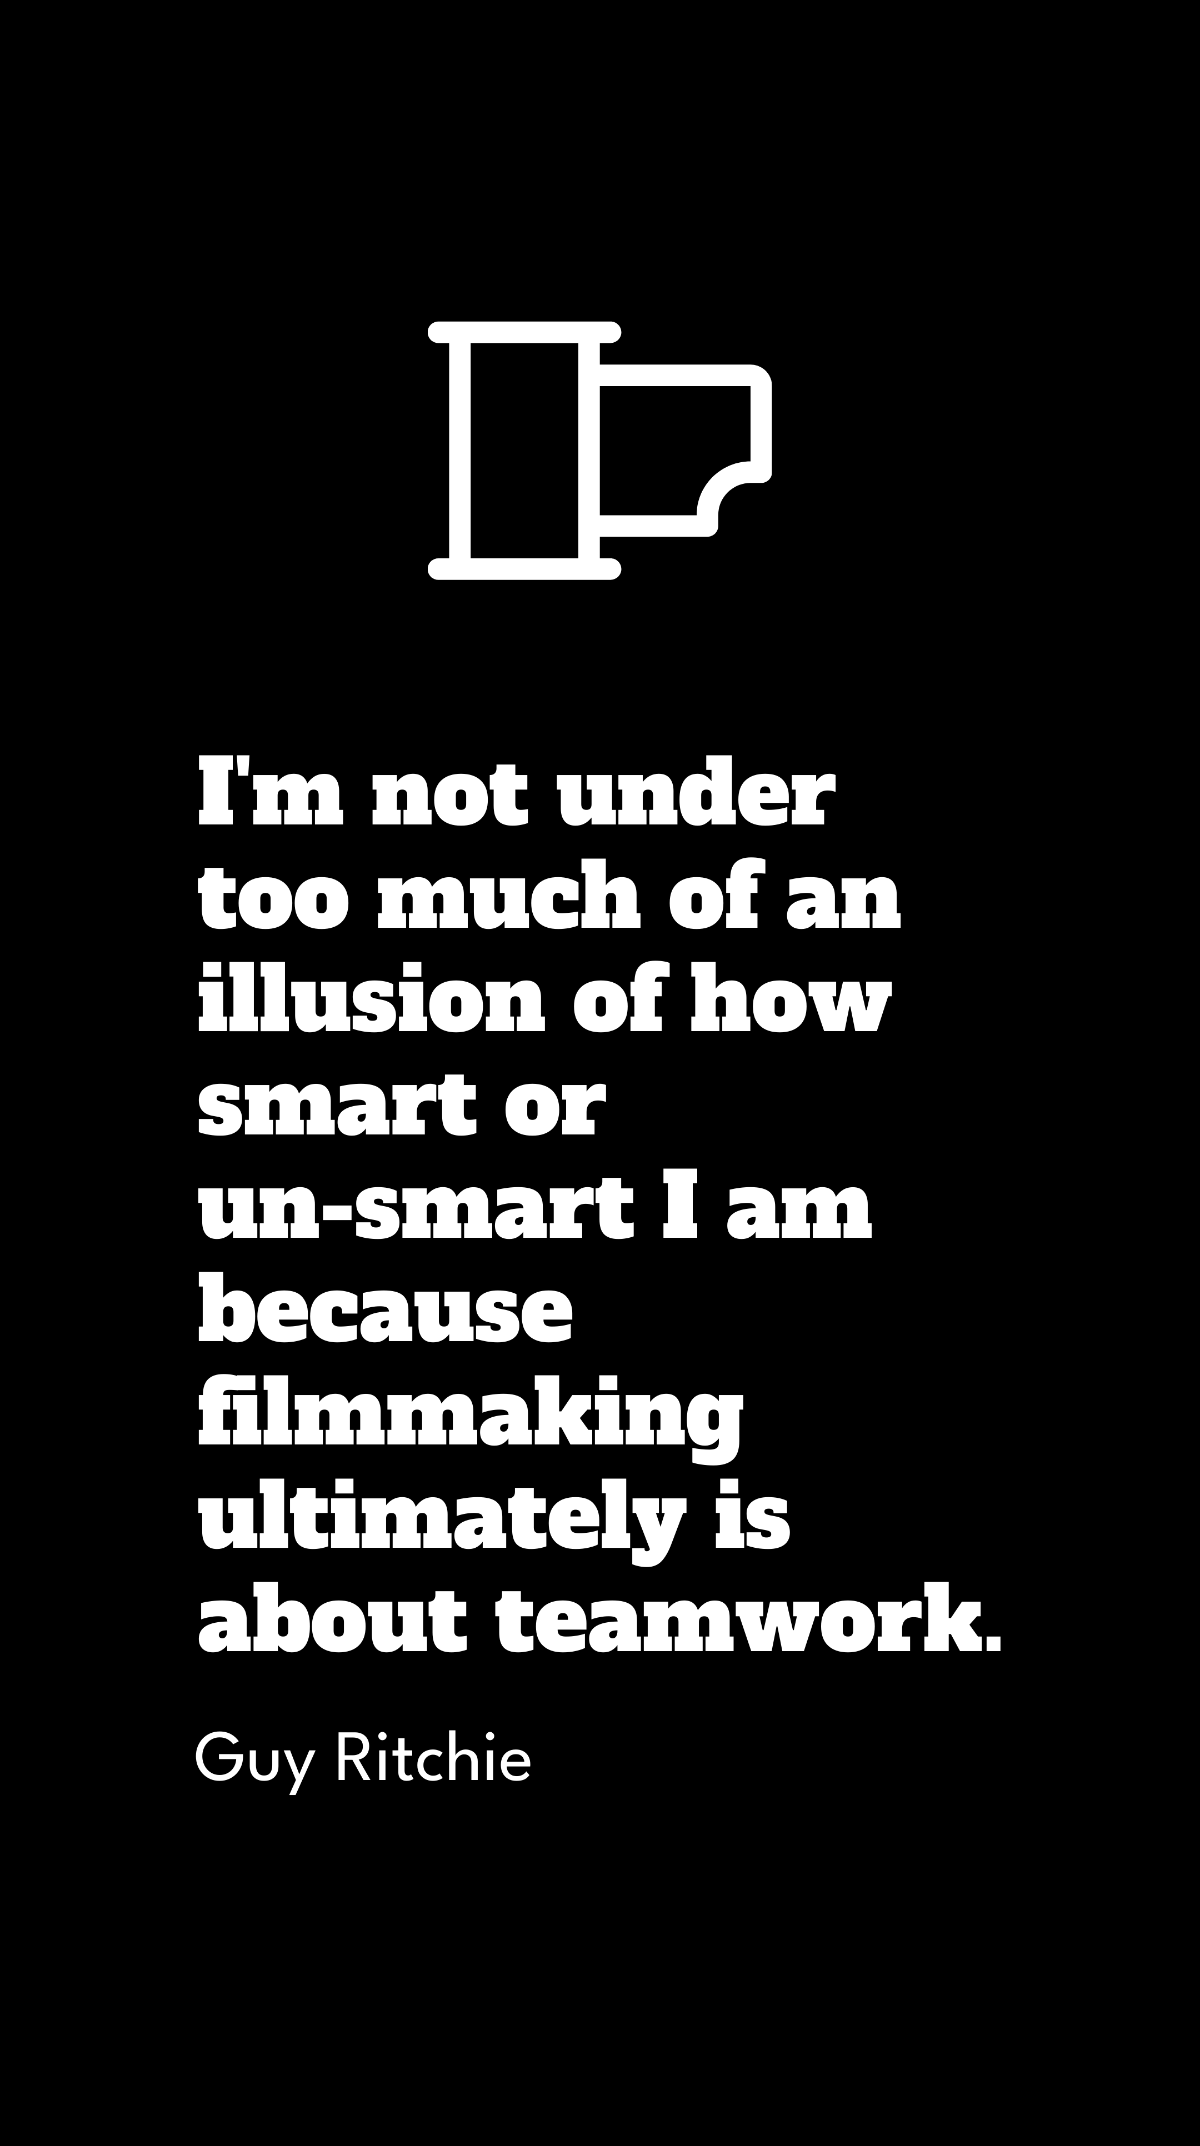 Guy Ritchie - I'm not under too much of an illusion of how smart or un-smart I am because filmmaking ultimately is about teamwork.